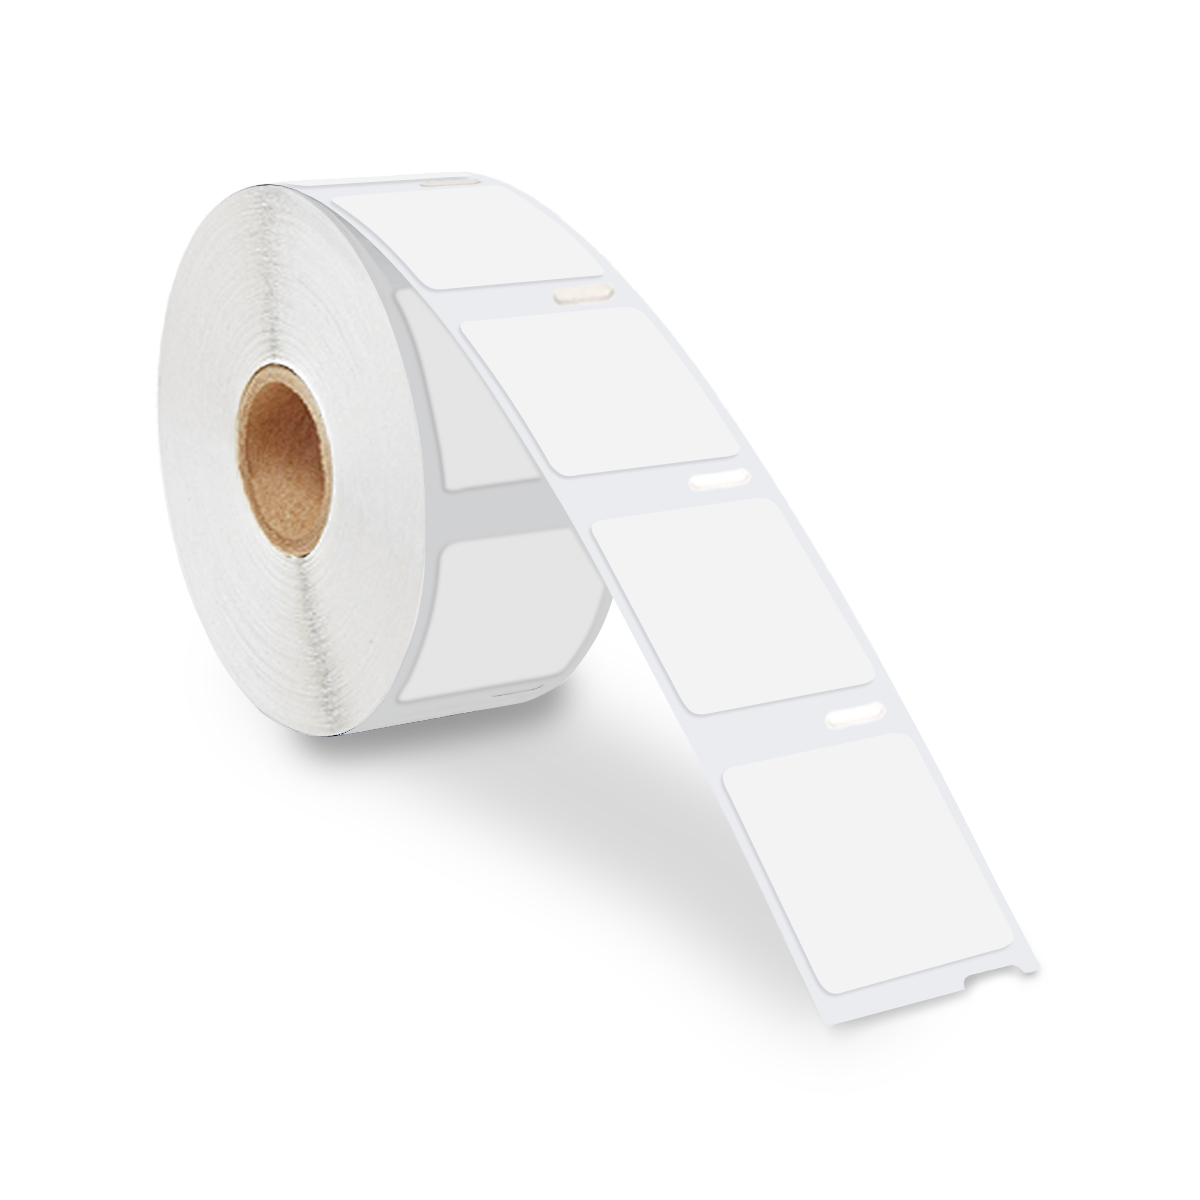 12 Rolls750 Labels P/R Dymo White 30332 Dymo Compatible Shipping Address1"x1" 